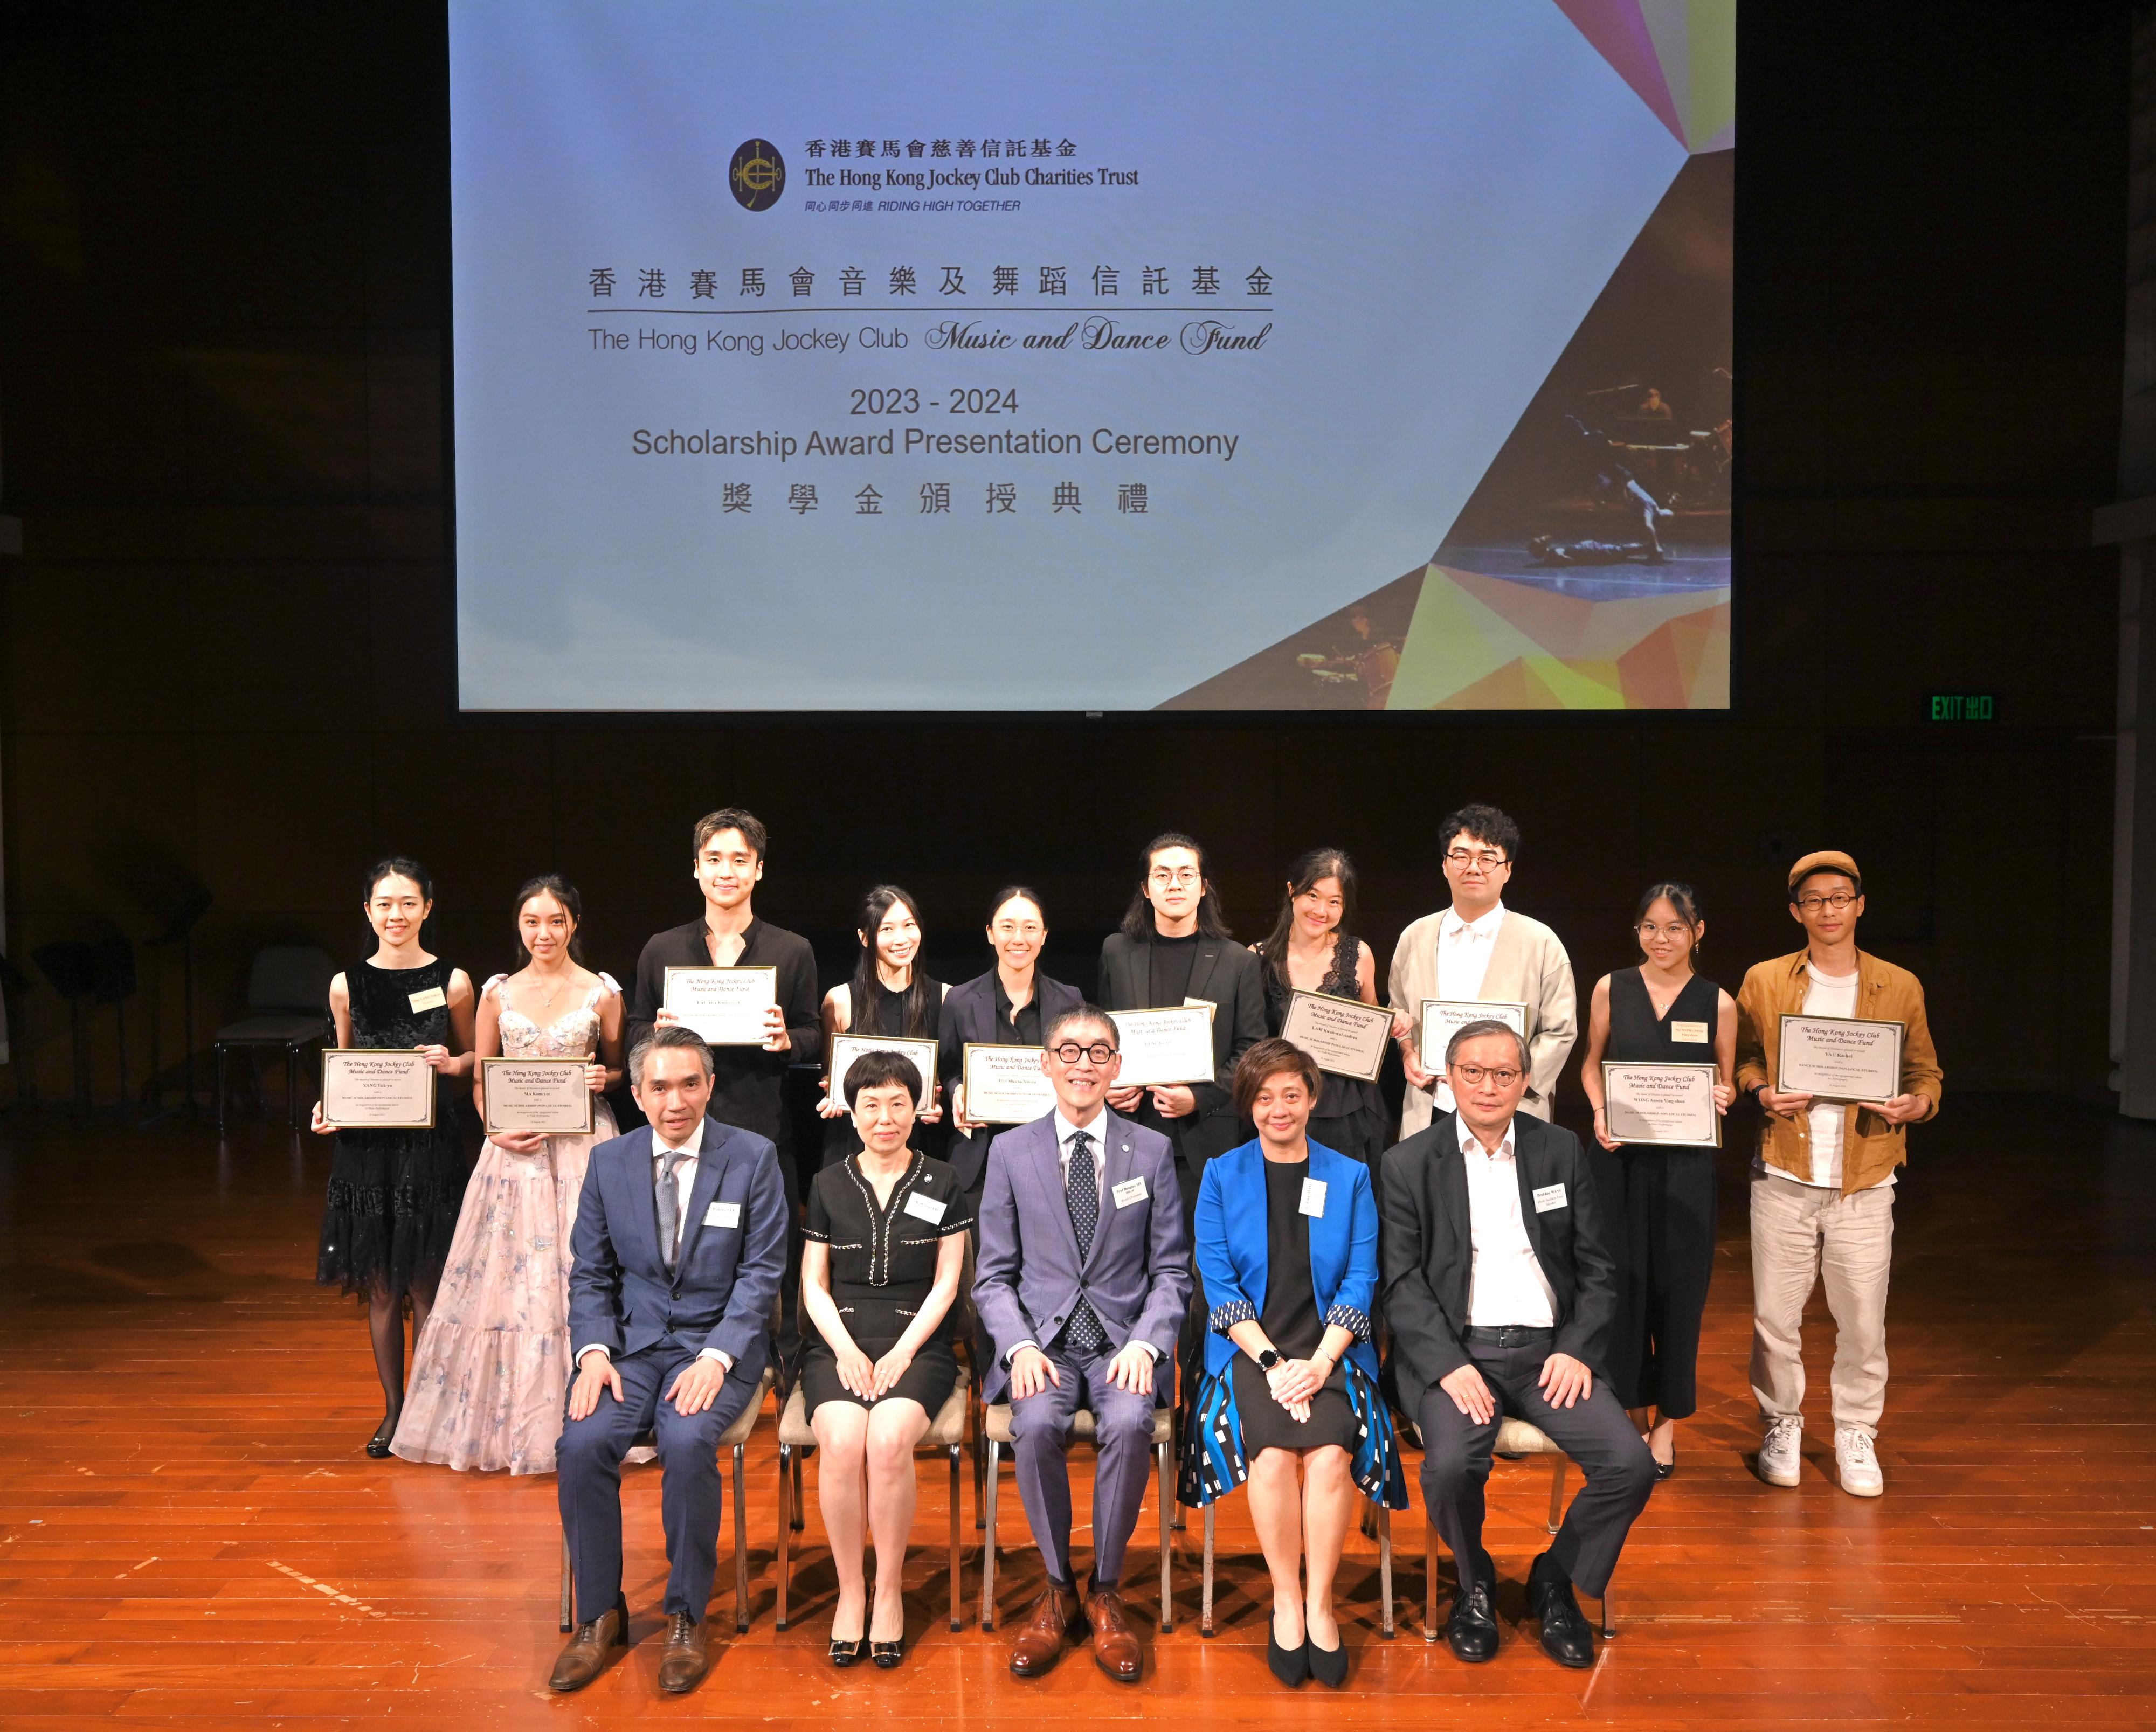 The Hong Kong Jockey Club Music and Dance Fund held a ceremony today (August 18) to award scholarships to 10 young talents in music and dance. Photo shows the Chairman of the Board of Trustees of the Hong Kong Jockey Club Music and Dance Fund, Professor Douglas So (front row, centre); the Principal Assistant Secretary for Culture, Sports and Tourism (Culture), Dr Iona Sham (front row, second right); the Executive Manager, Charities (Sports, Culture & Community Engagement) of the Hong Kong Jockey Club, Ms Winnie Yip (front row, second left); the Chairperson Mr Warren Lee (front row, first left) and member Professor Ray Wang (front row, first right) of the Music Audition Panel, and scholarship awardees or their representatives at the ceremony.